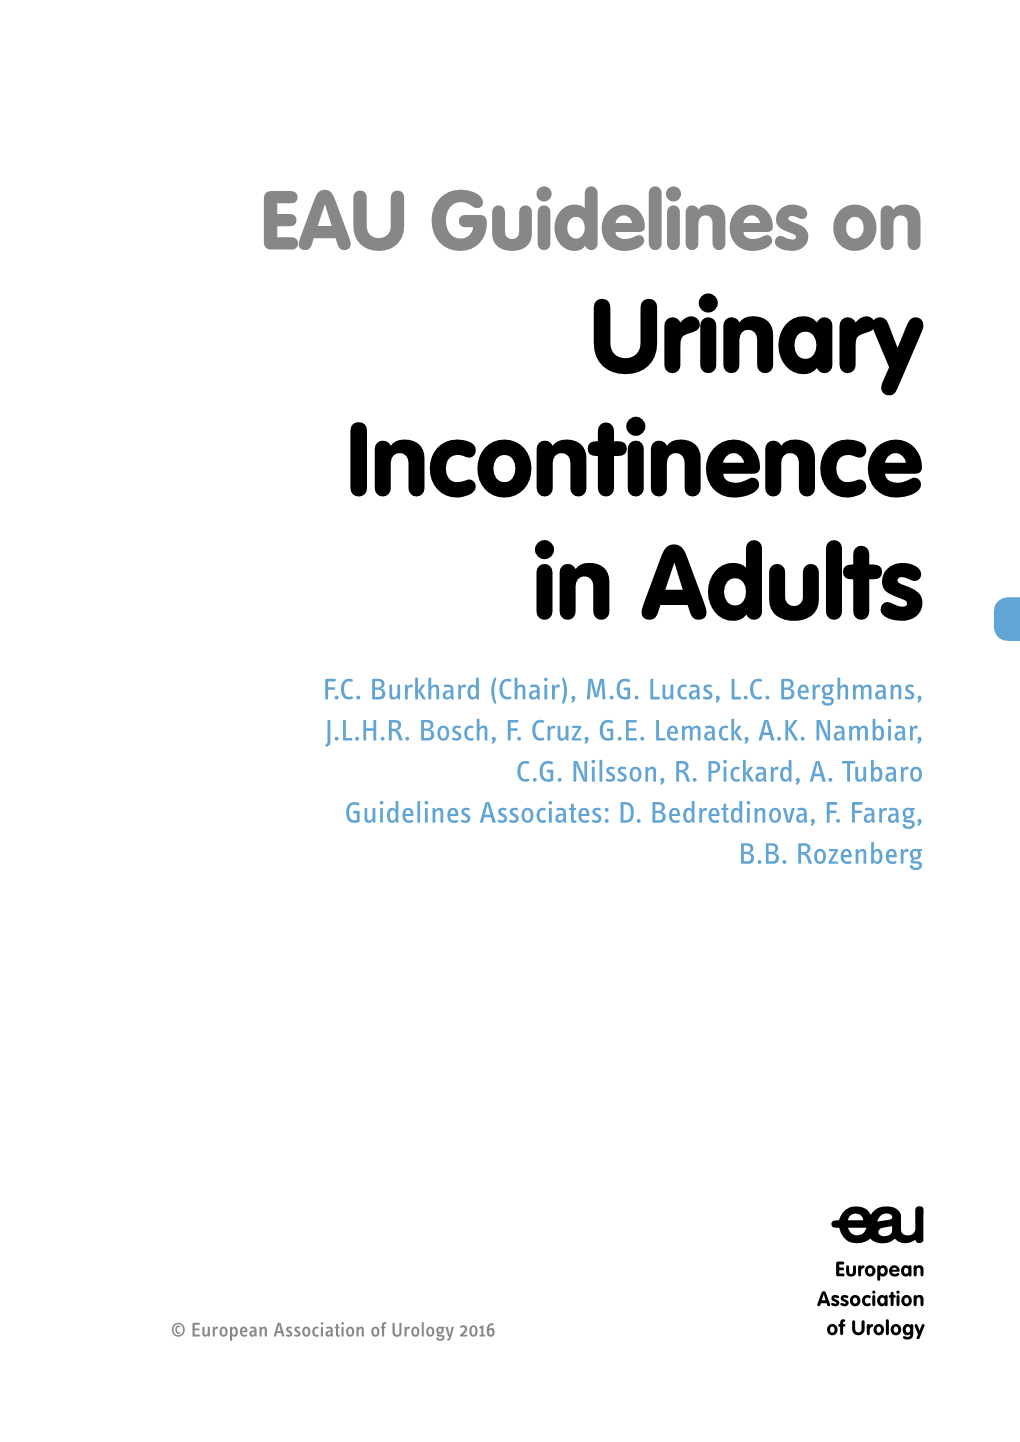 EAU Guidelines on Urinary Incontinence 2016